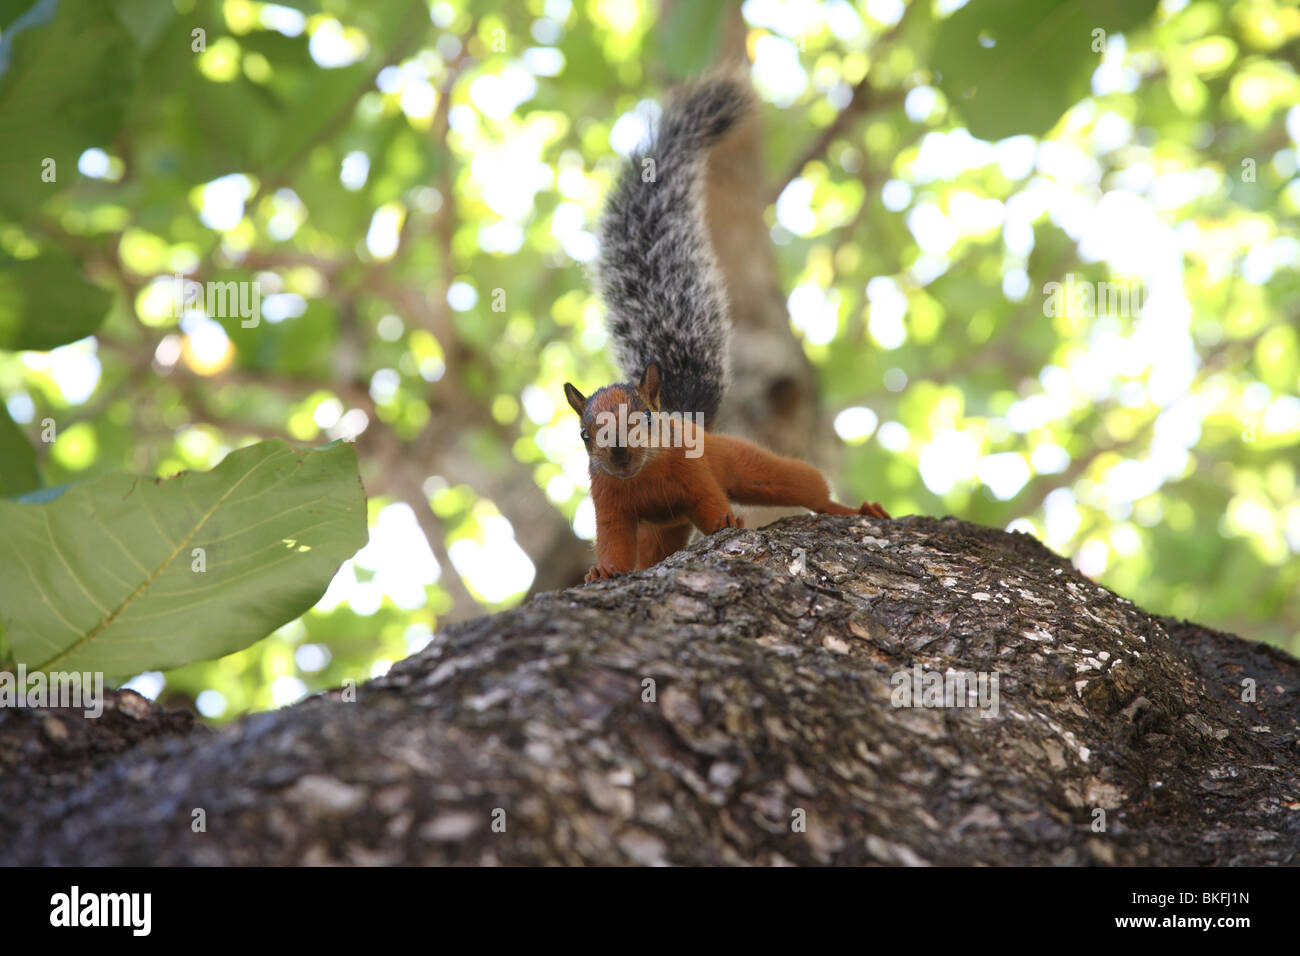 Camera aware red-tailed squirrel. Stock Photo